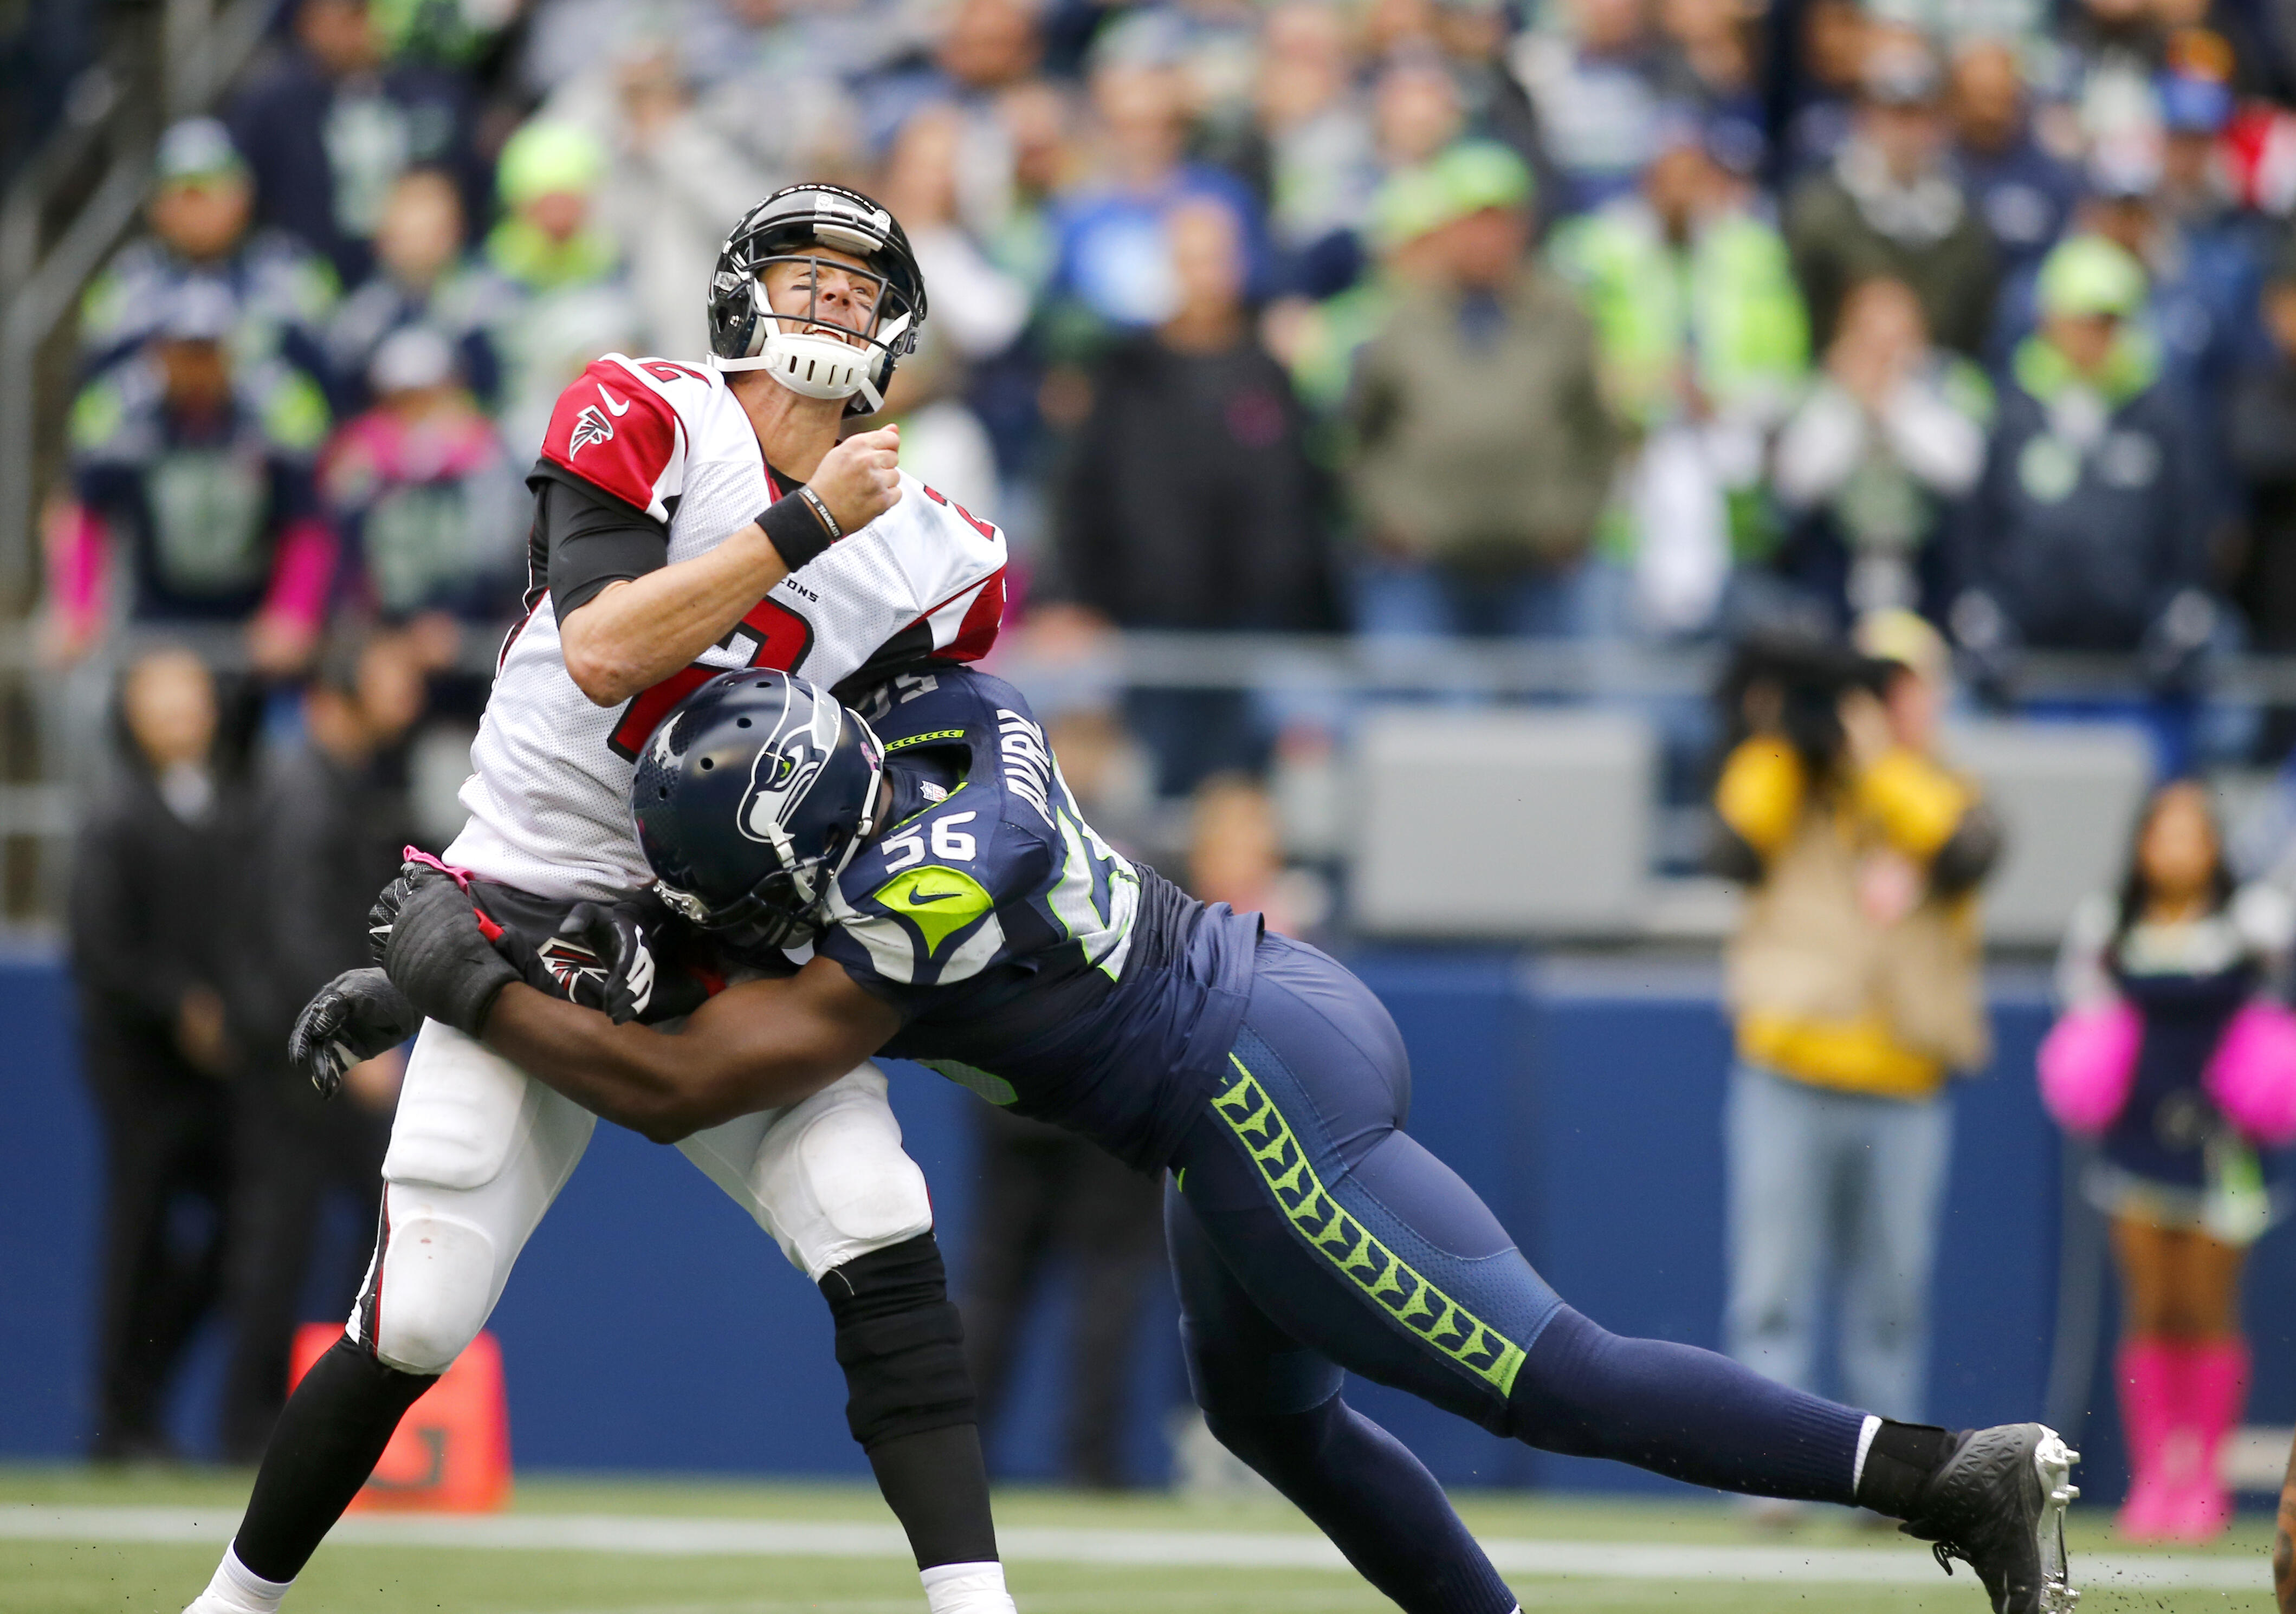 SEATTLE, WA - OCTOBER 16:  Quarterback Matt Ryan #2 of the Atlanta Falcons is hit by defensive end Cliff Avril #56 of the Seattle Seahawks at CenturyLink Field on October 16, 2016 in Seattle, Washington.  (Photo by Jonathan Ferrey/Getty Images)